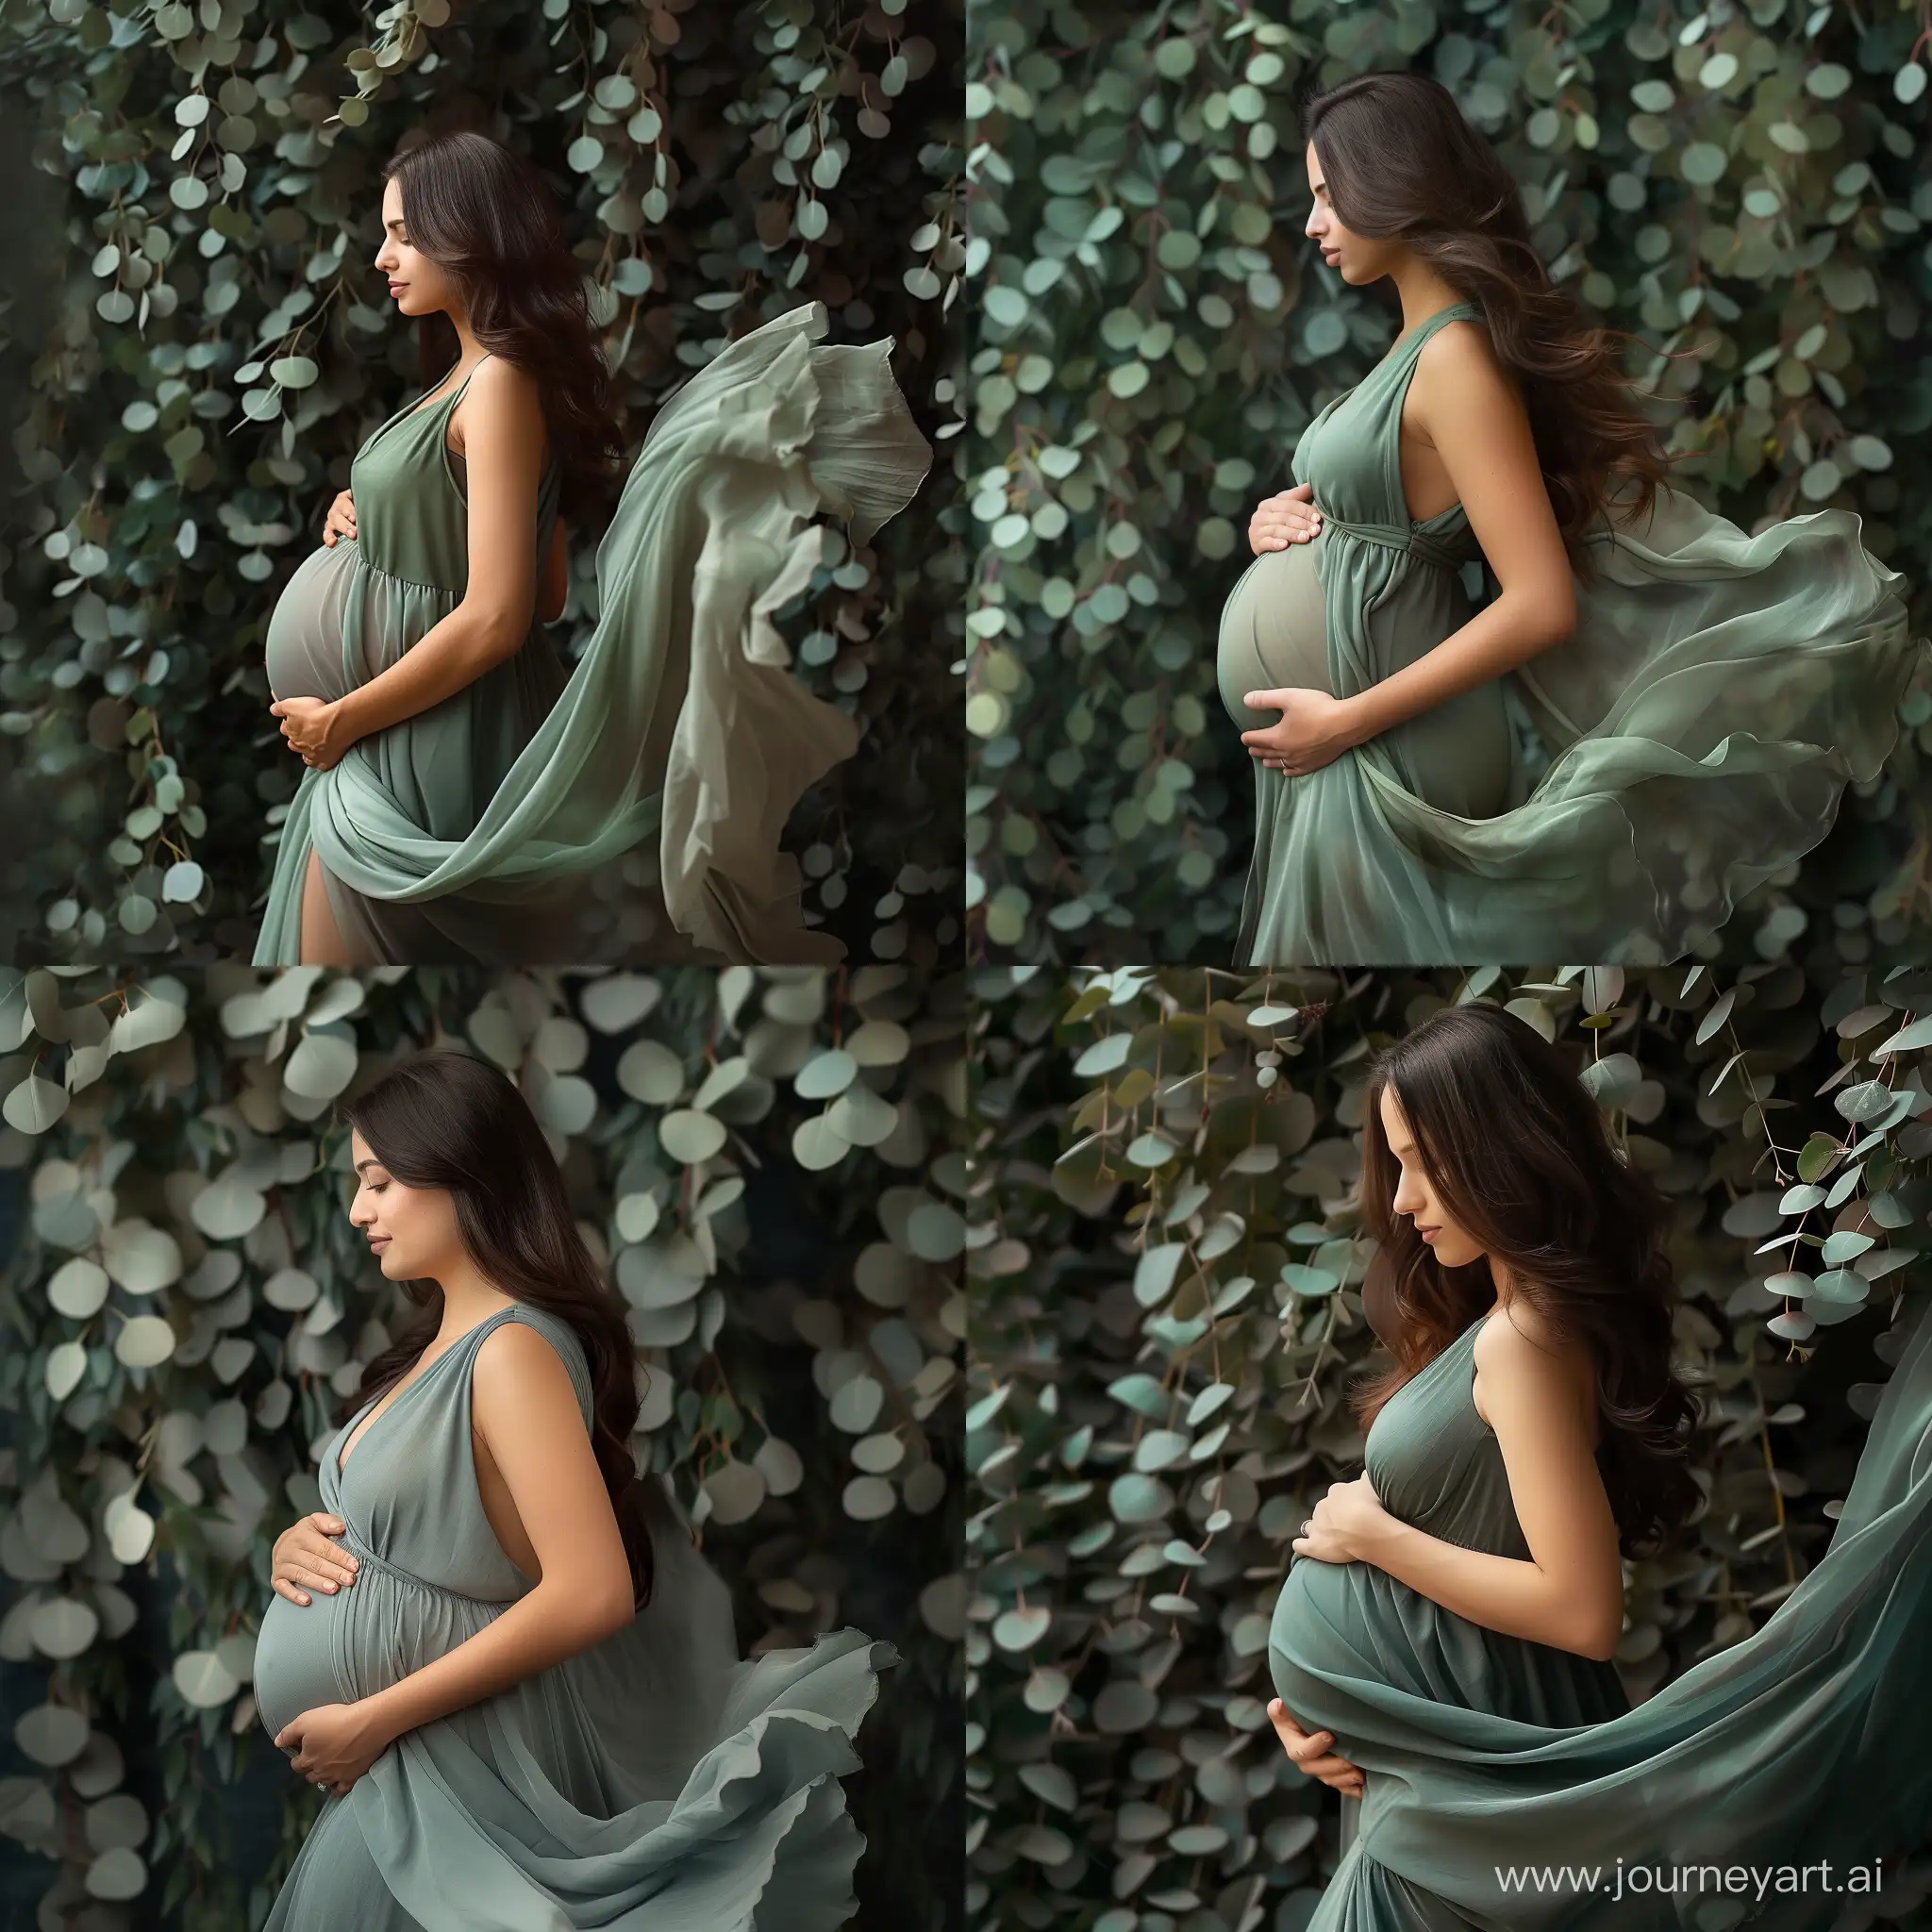 Pregnant-Woman-in-EucalyptusColored-Dress-Maternity-Serenity-in-Nature